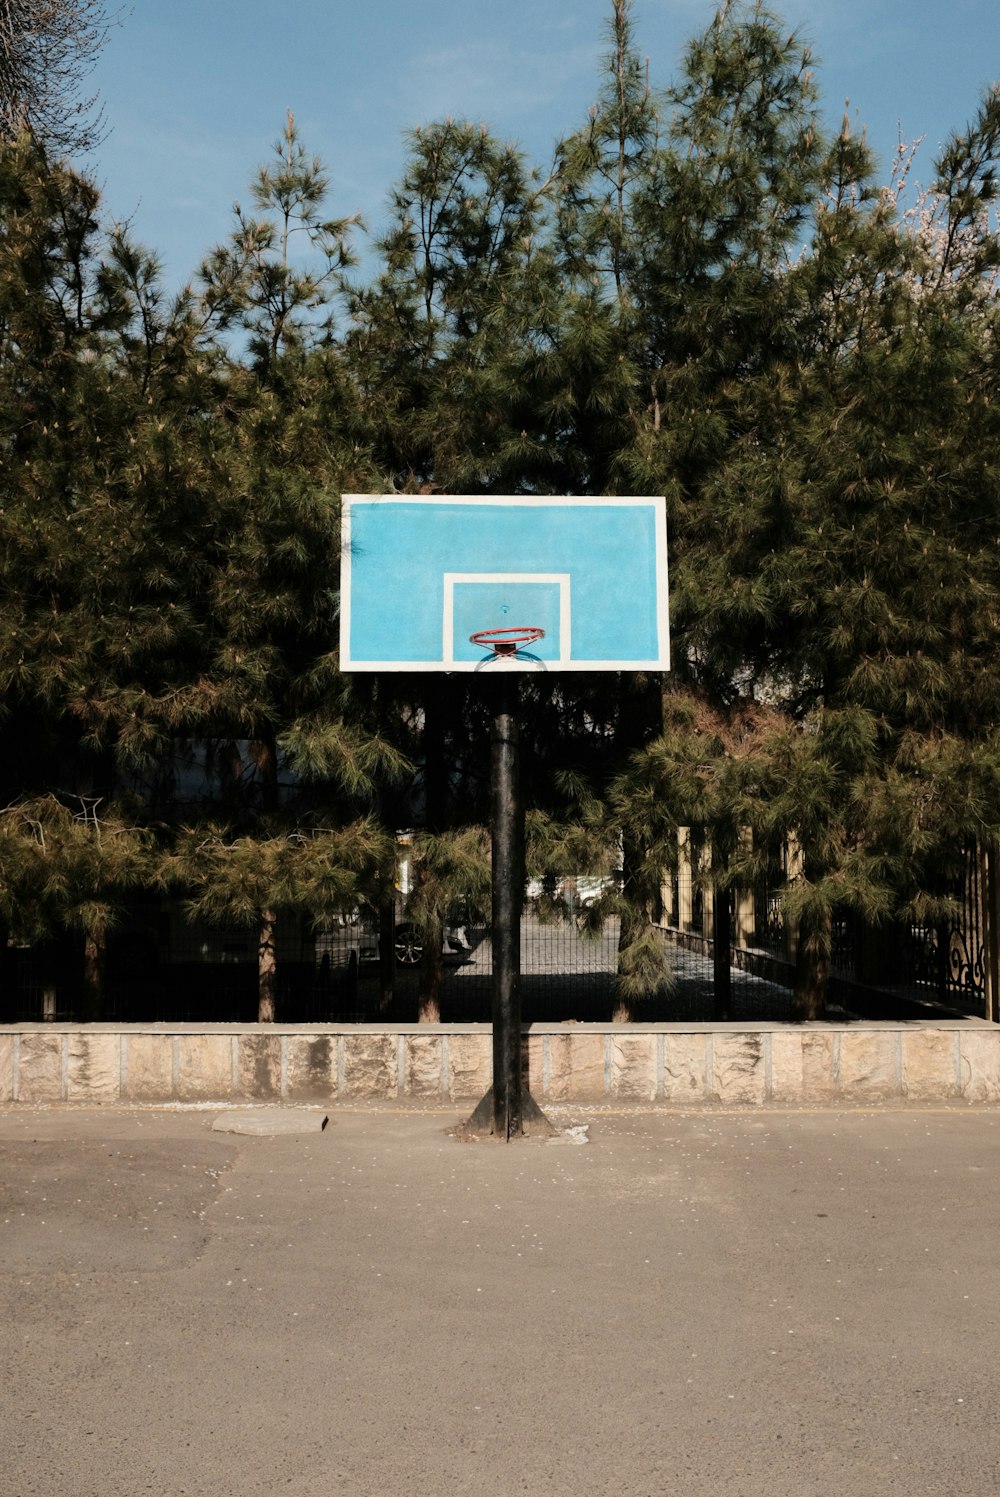 a basketball court with a blue backboard in front of some trees